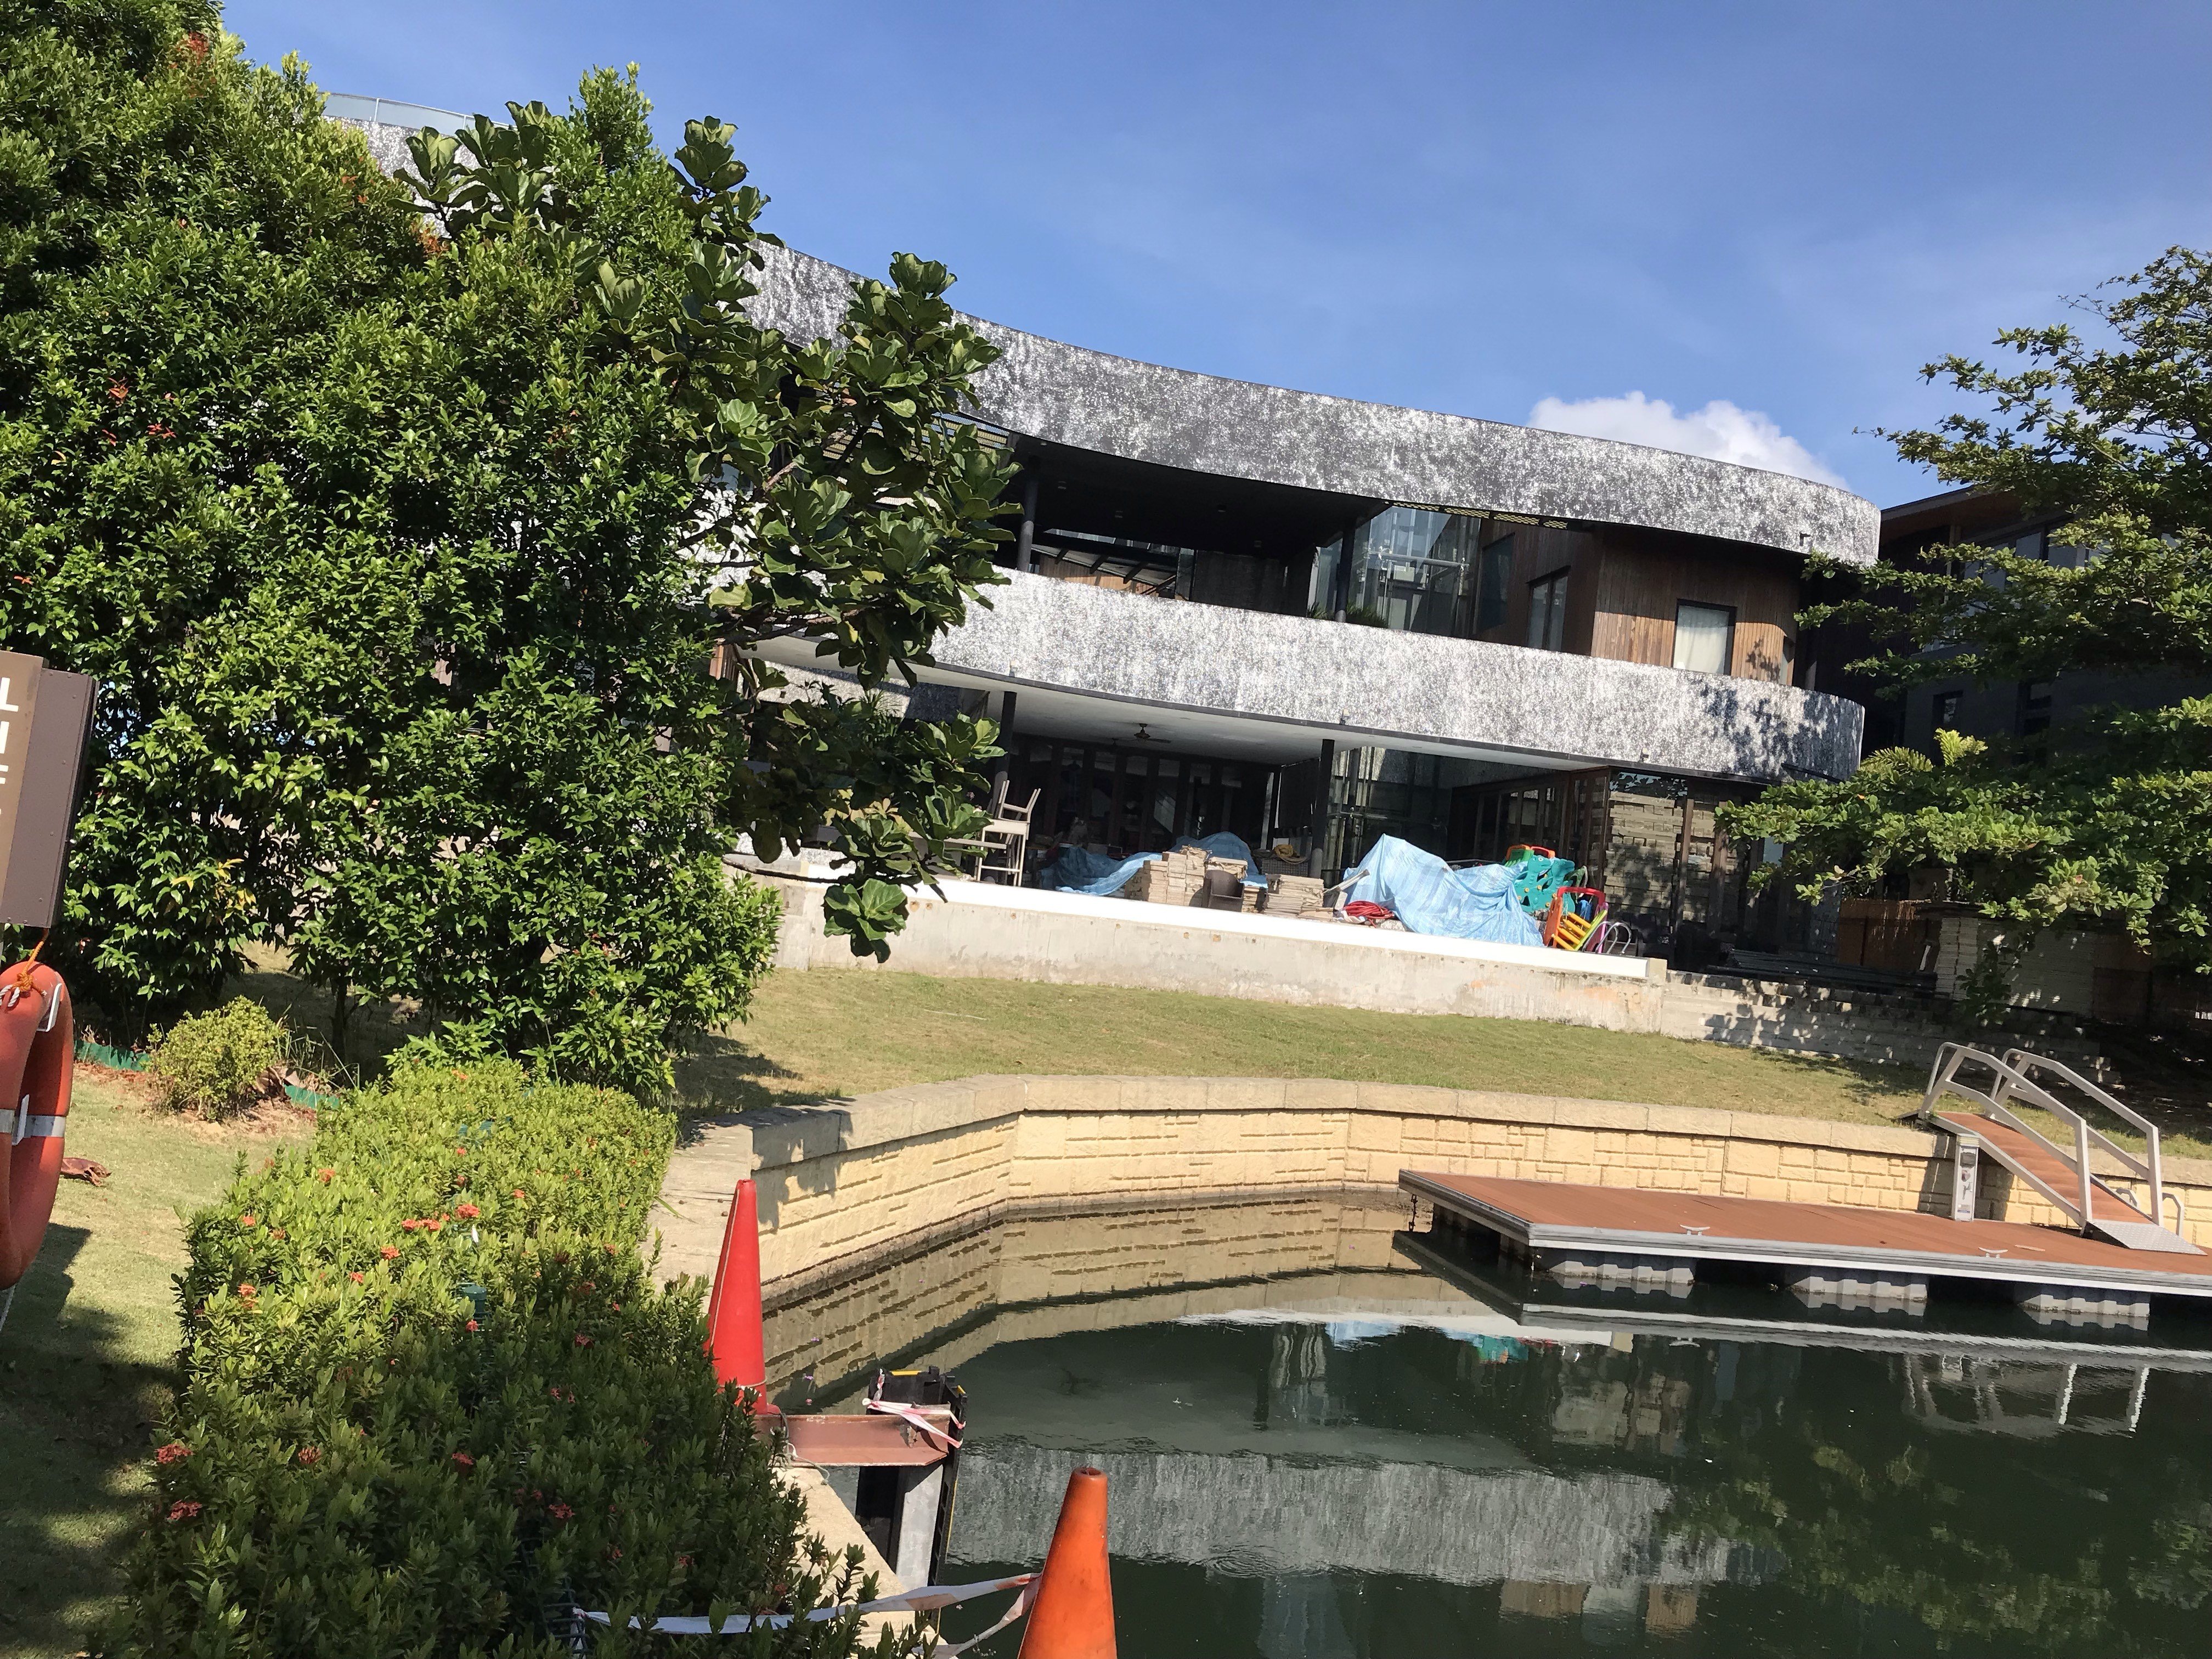 Kingsford Huray Development paid a hefty S$830 million for the Normanton Park estate. But it has been blocked from selling units there after complaints of shoddy work. Photo: Serene Goh